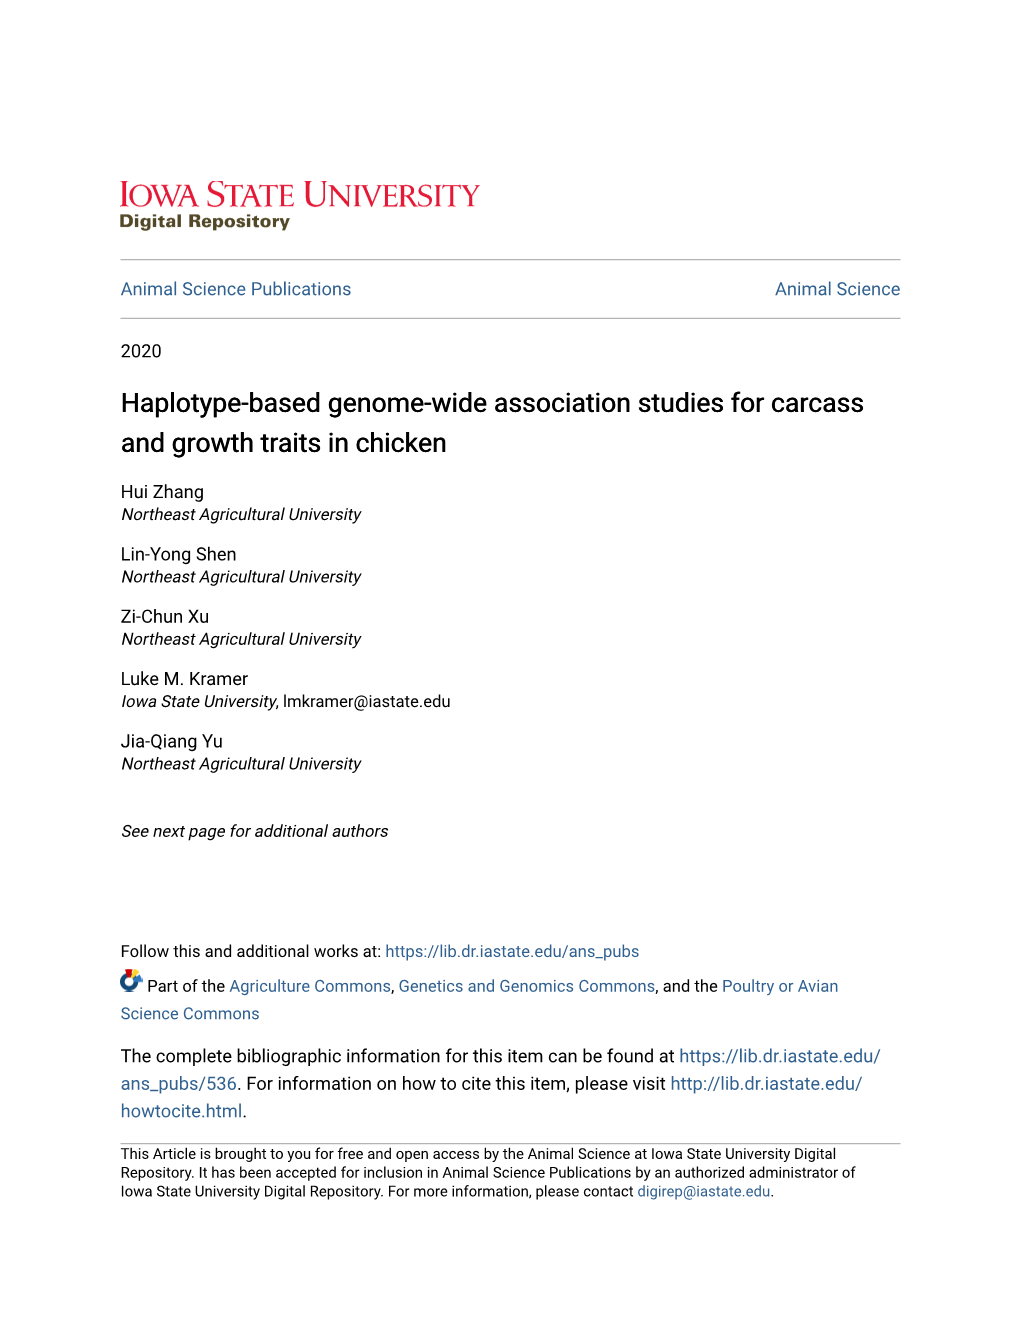 Haplotype-Based Genome-Wide Association Studies for Carcass and Growth Traits in Chicken